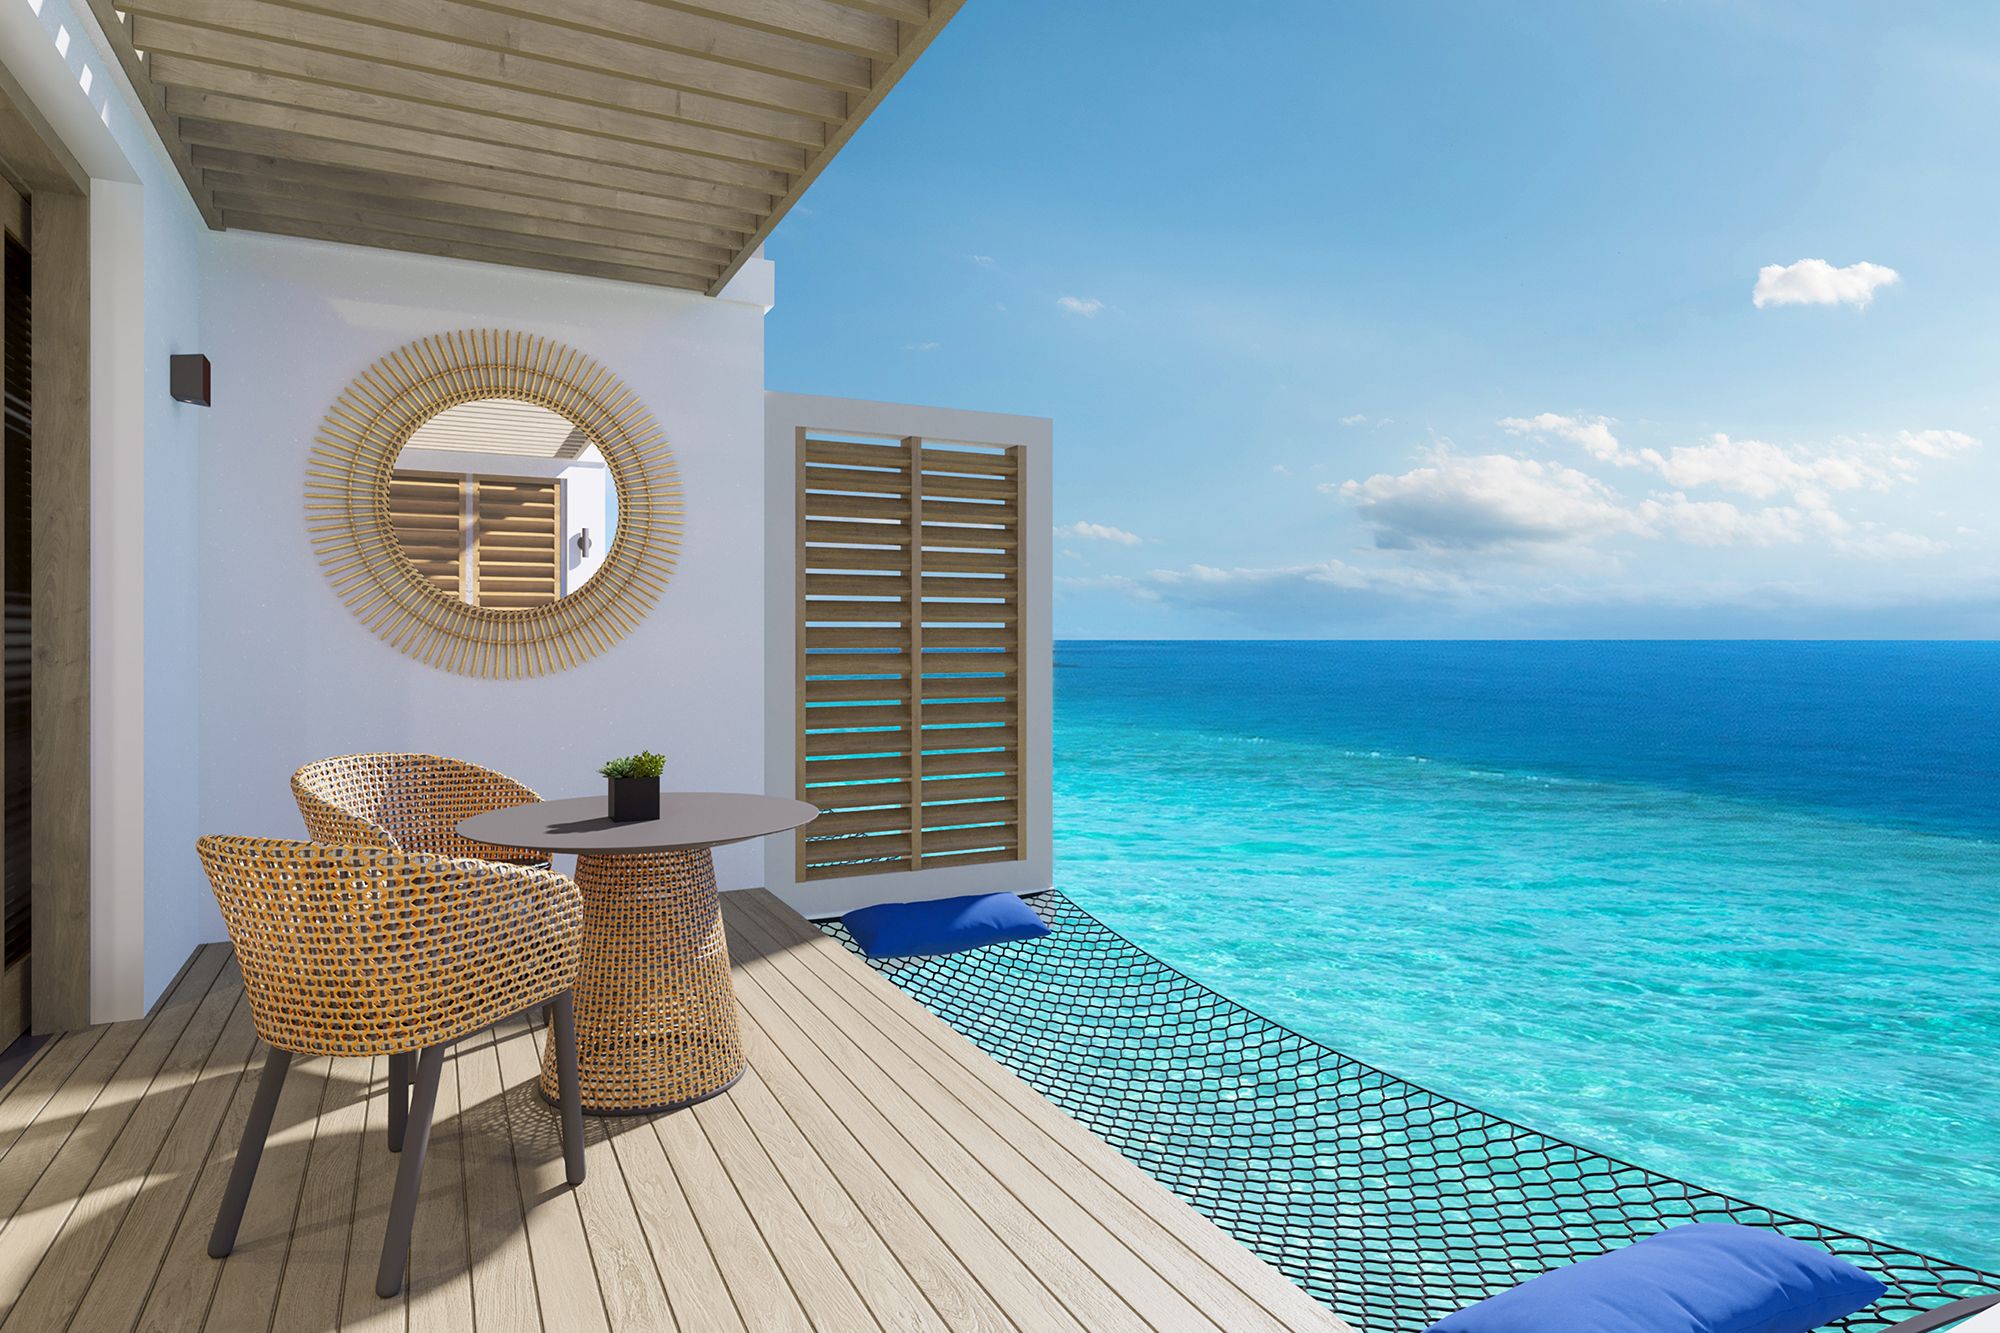 New To Sandals: 6 Experiences That Make Sandals Saint Vincent Stand Out